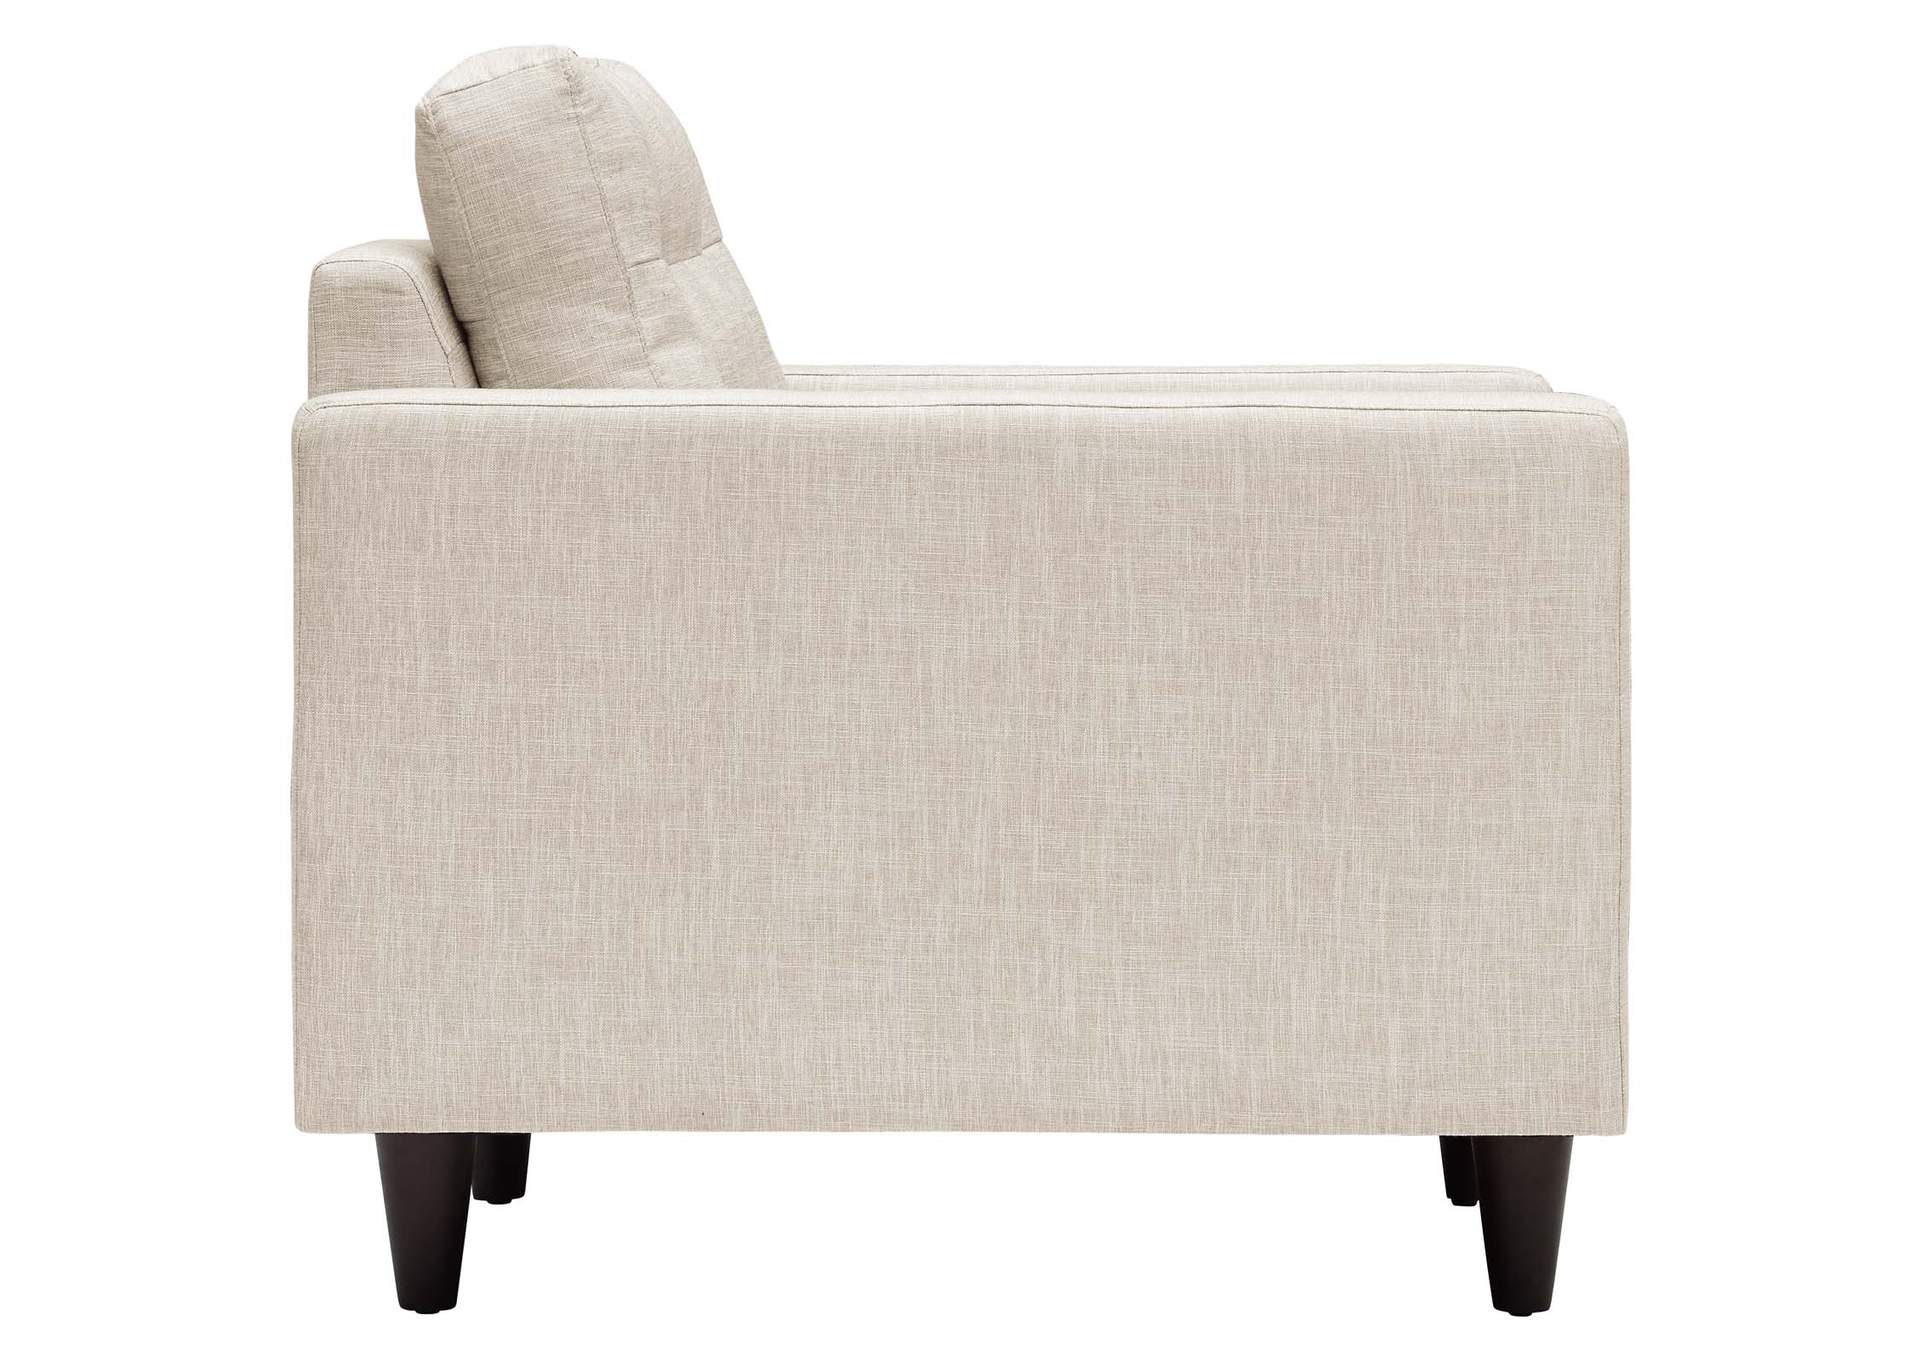 Beige Empress Upholstered Fabric Arm Chair,Modway